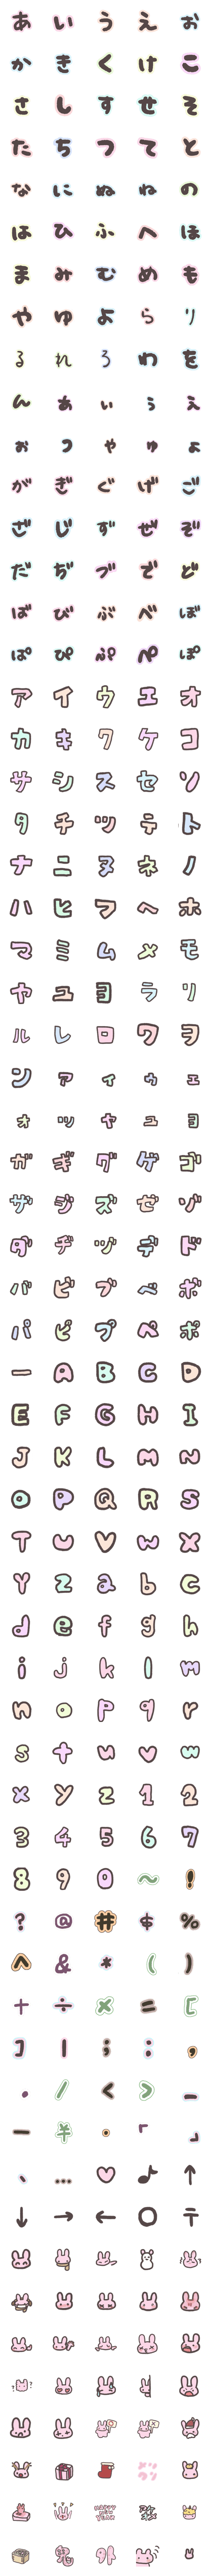 [LINE絵文字]うさぎとかわいい文字の画像一覧